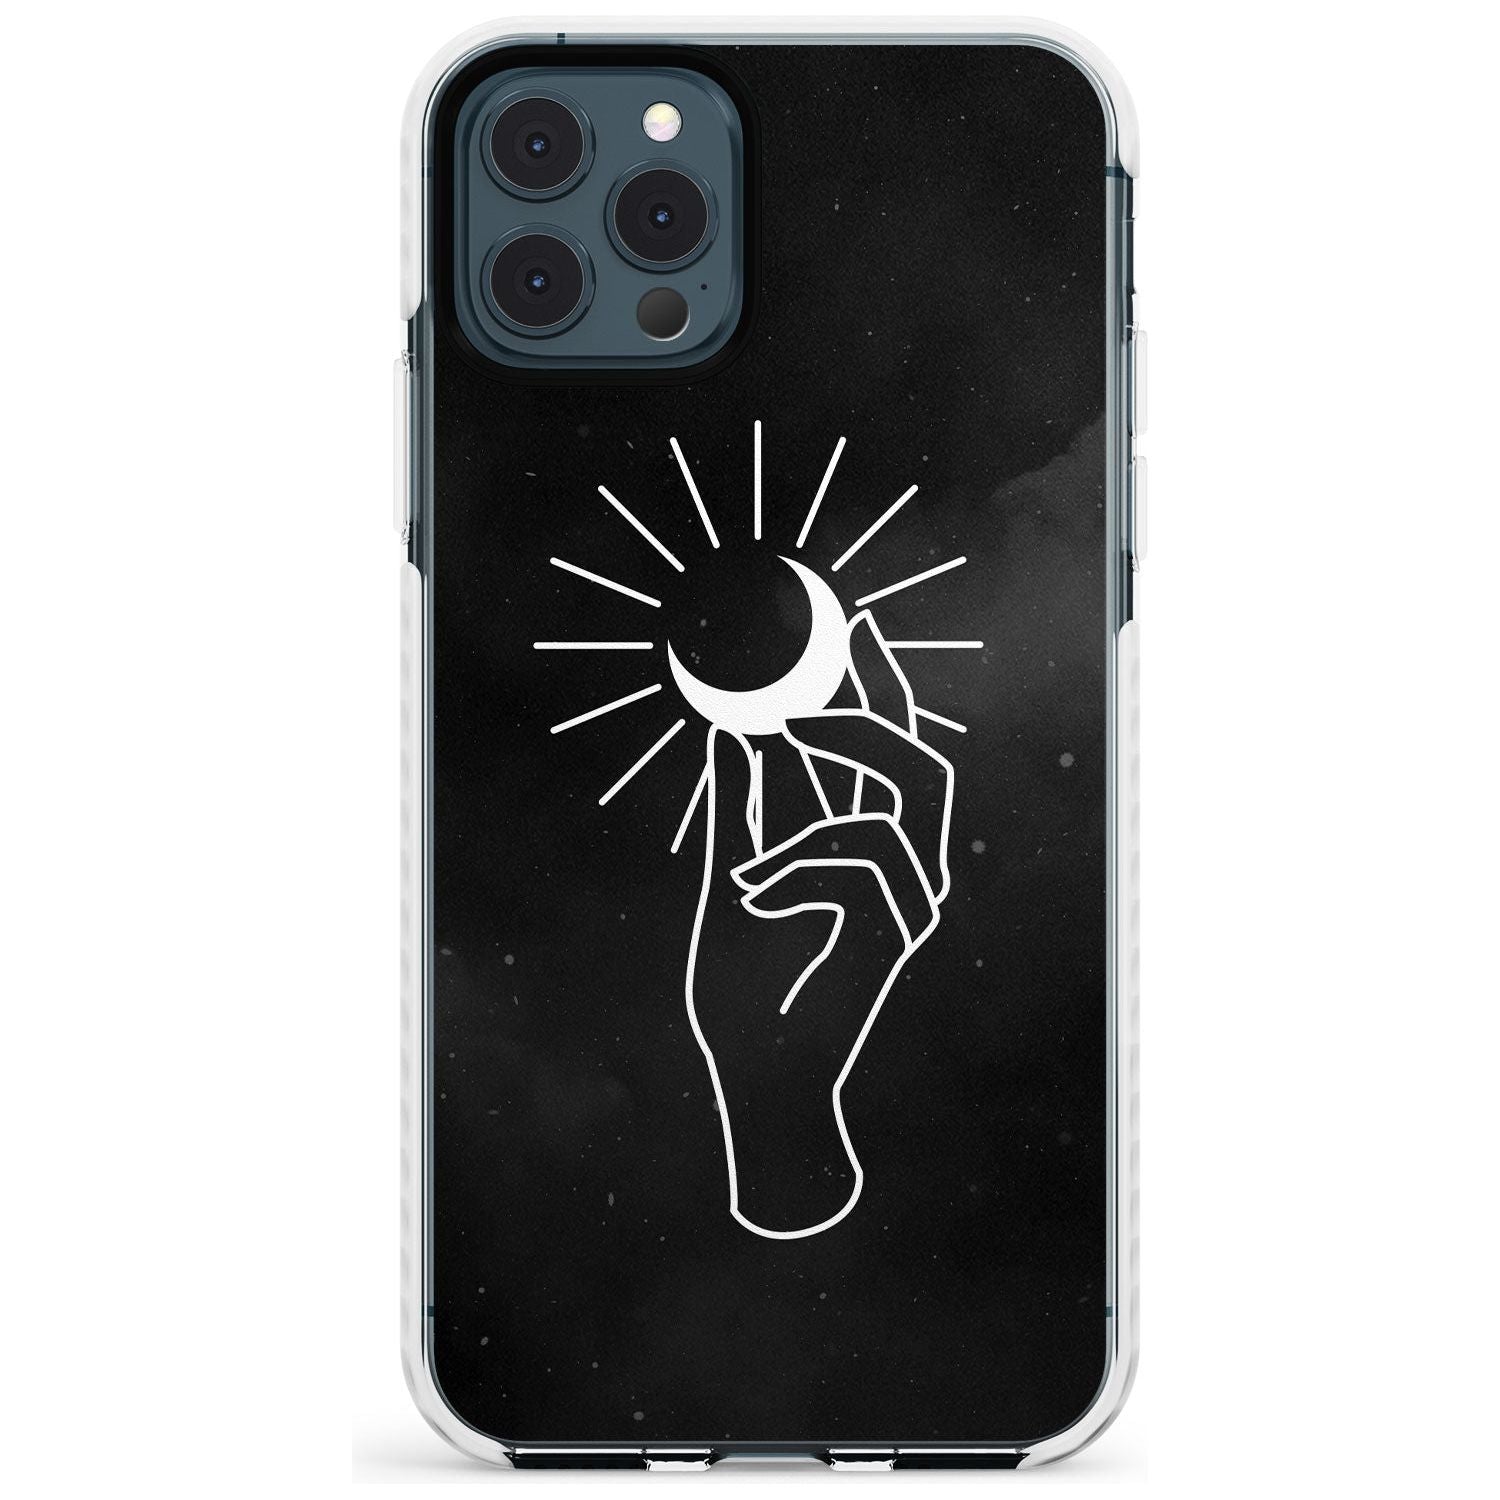 Hand Holding Moon Slim TPU Phone Case for iPhone 11 Pro Max